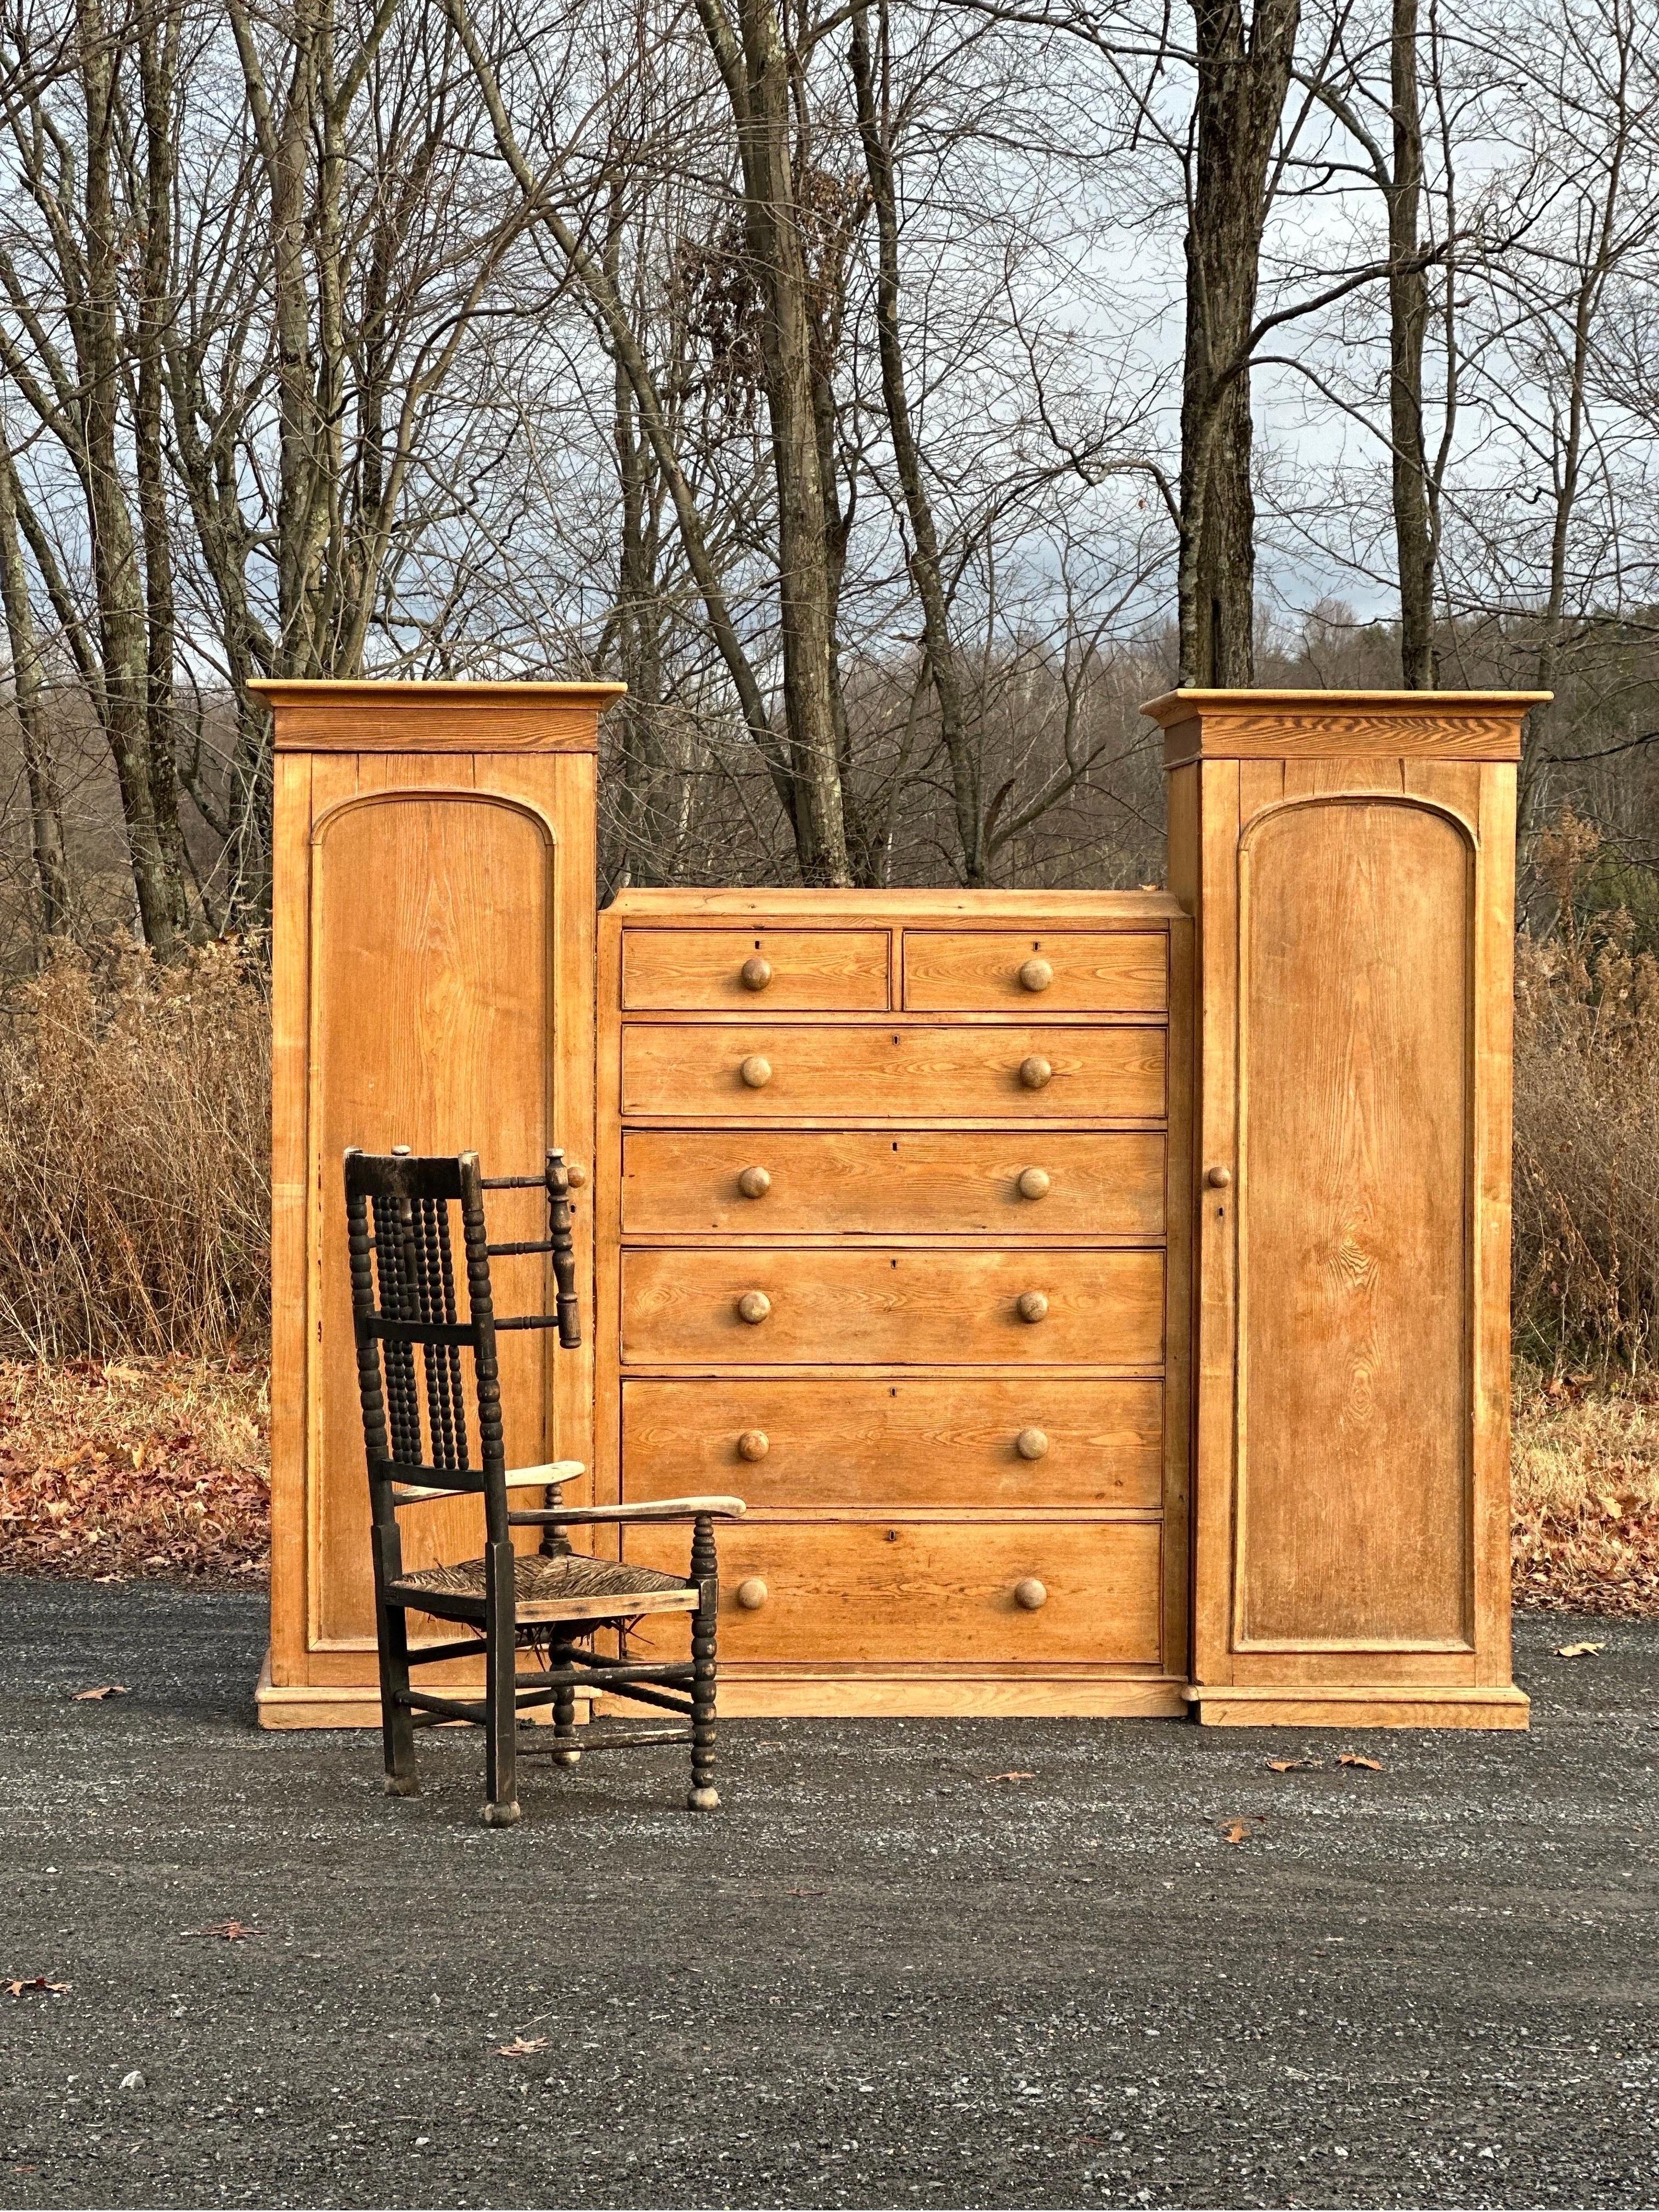 19th C Hemlock 7 drawer chest with wardrobes
All the storage you will ever need!
Three pieces. Drawers are all free and work nicely.
Great craftsmanship. Solid. 
Please contact me with any questions